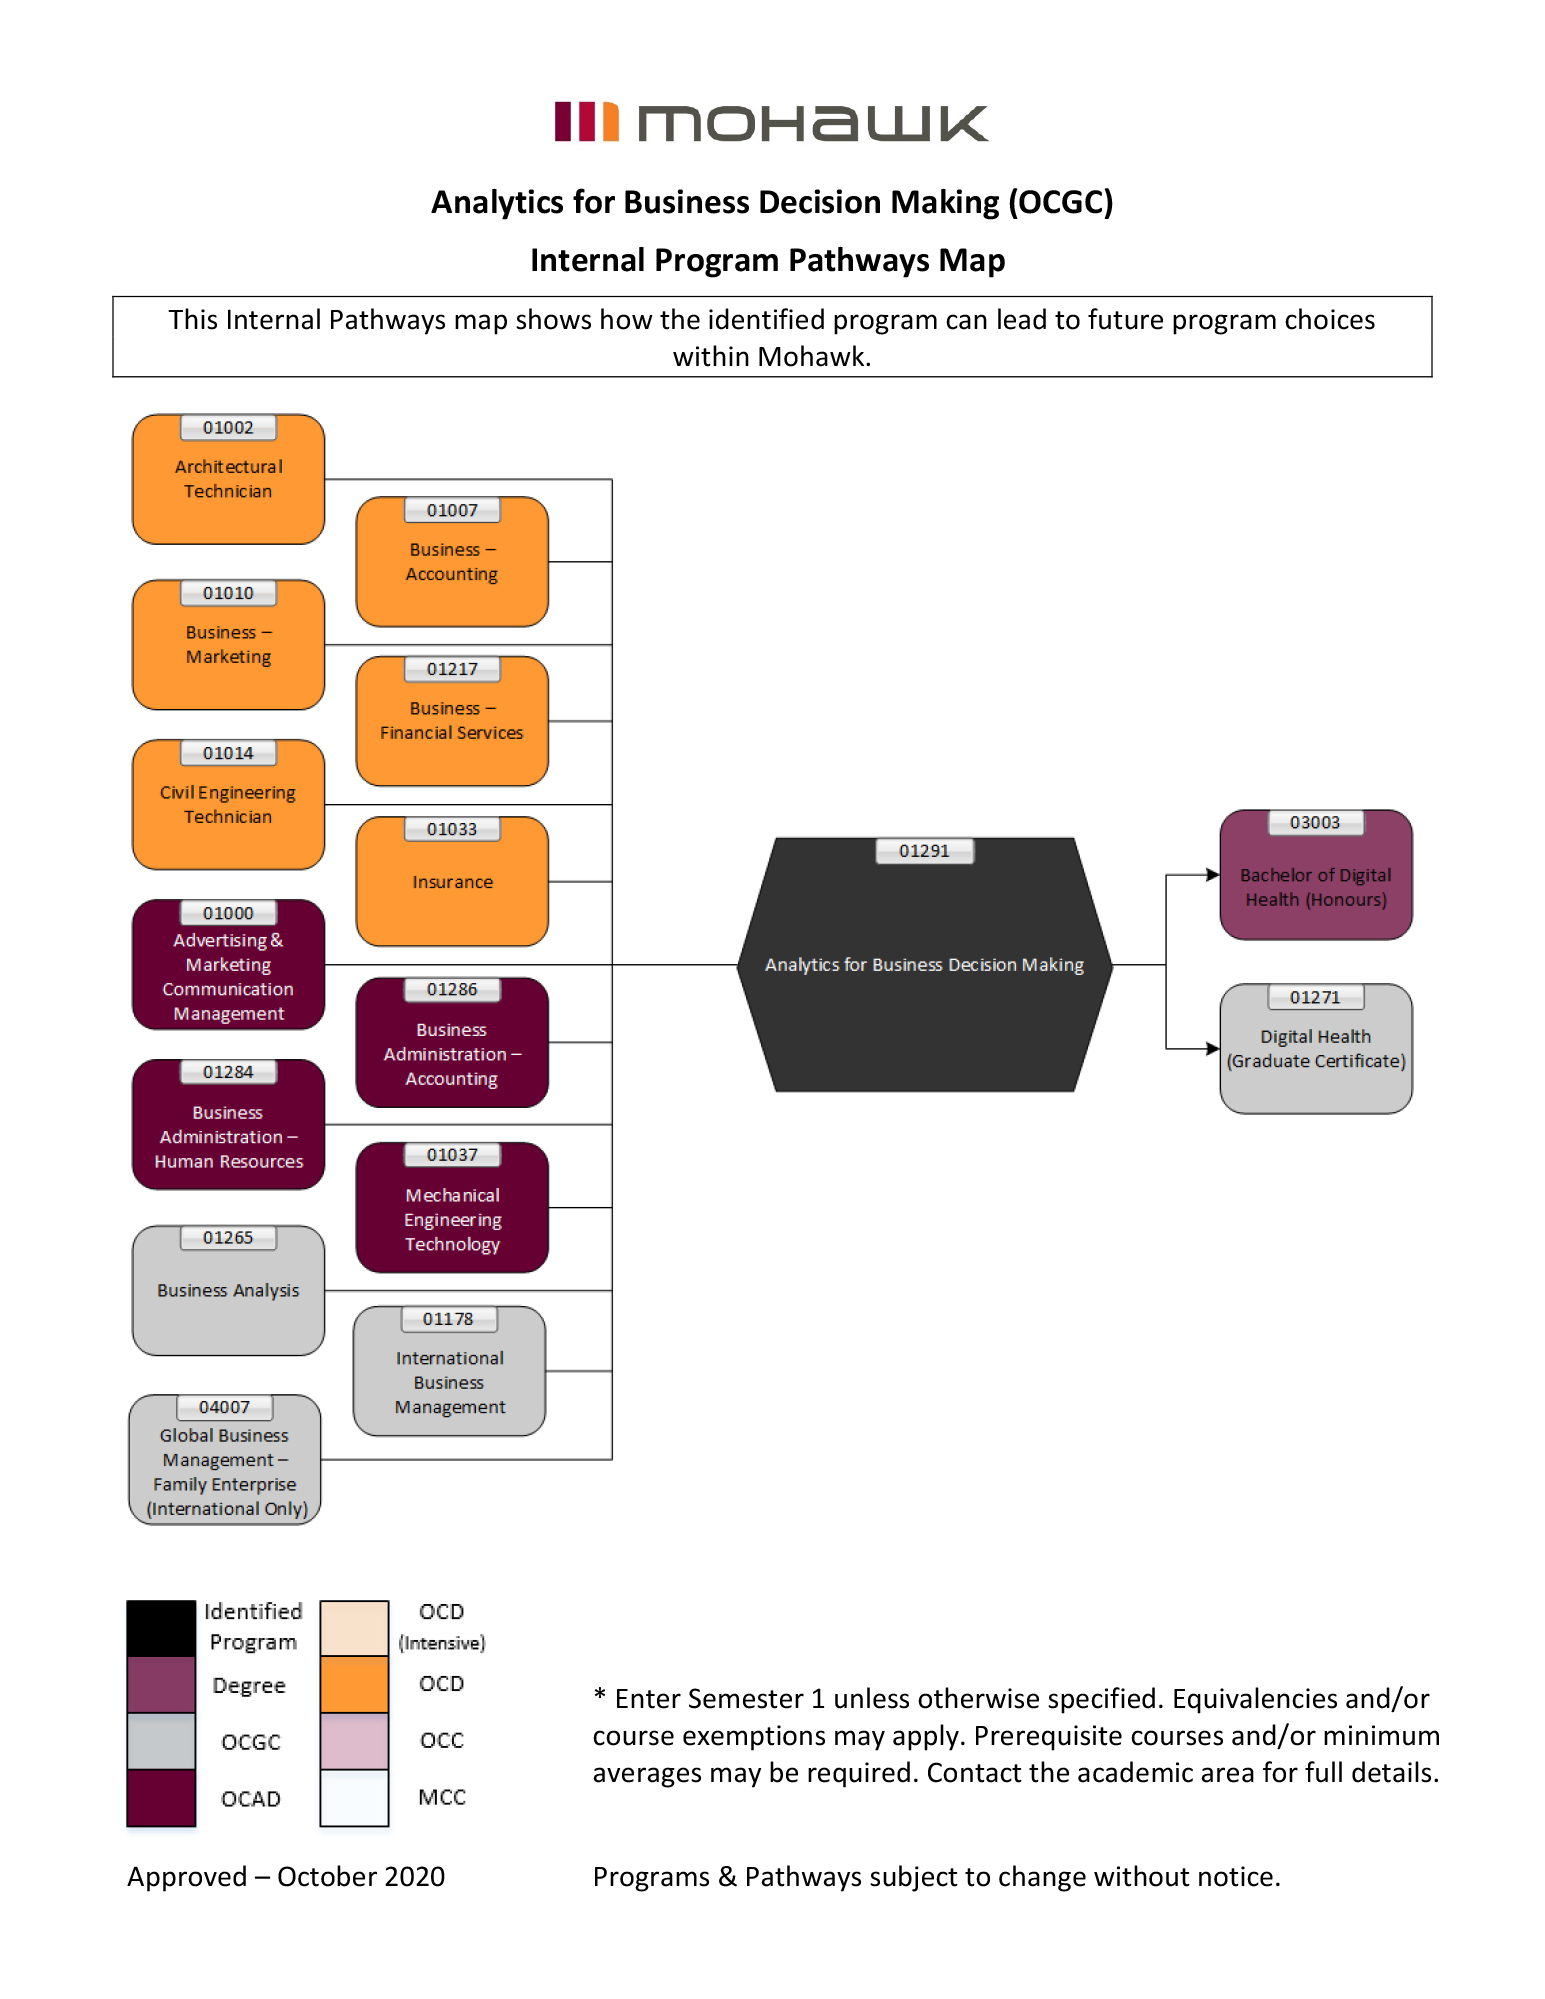 Analytics for Business Decision Making pathways map